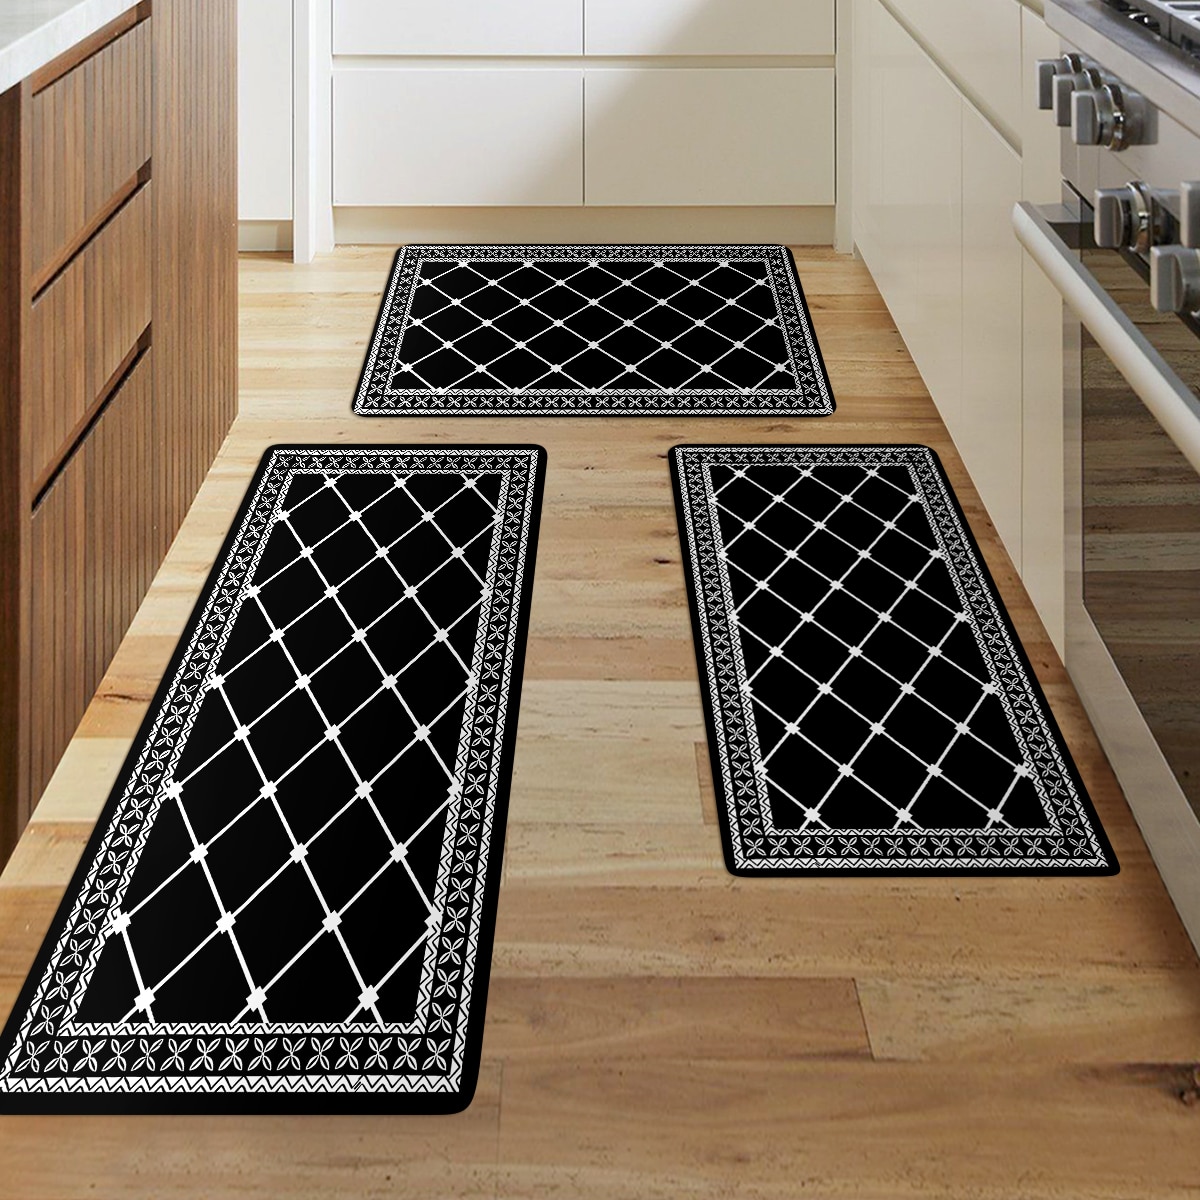 Color&Geometry Kitchen Runner Rugs Non Skid, Kitchen Mats for Floor  Cushioned Anti Fatigue, Foam Padded Kitchen Mats for Standing Comfortable,  Black